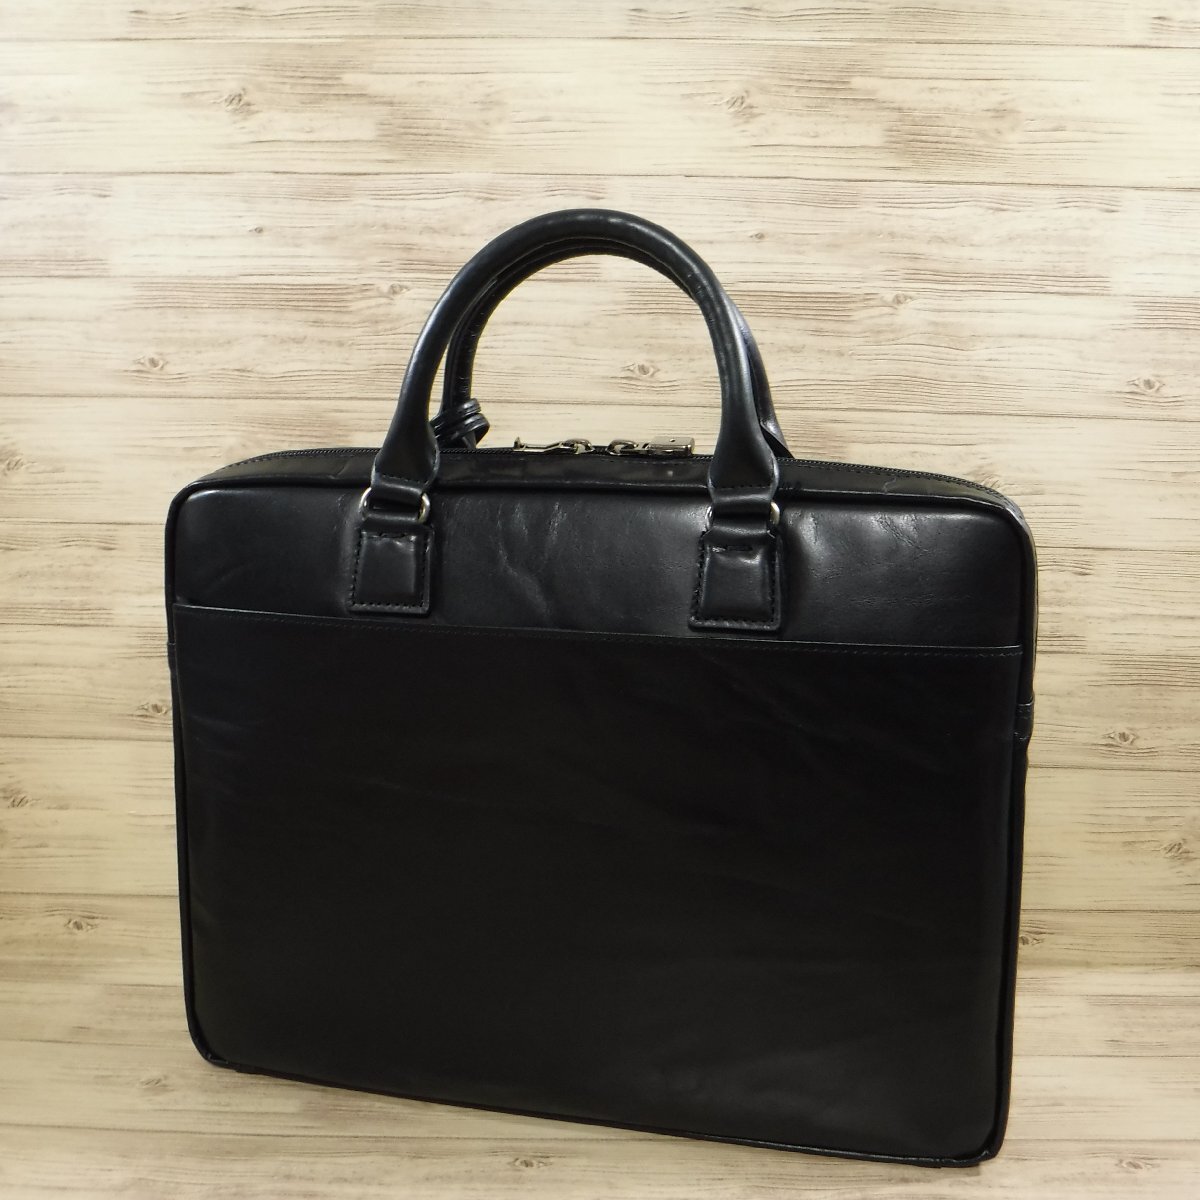 BB646 Mila Schon regular price 42900 jpy new goods black leather business bag key attaching made in Japan A4 arte 196532 black briefcase mila schon